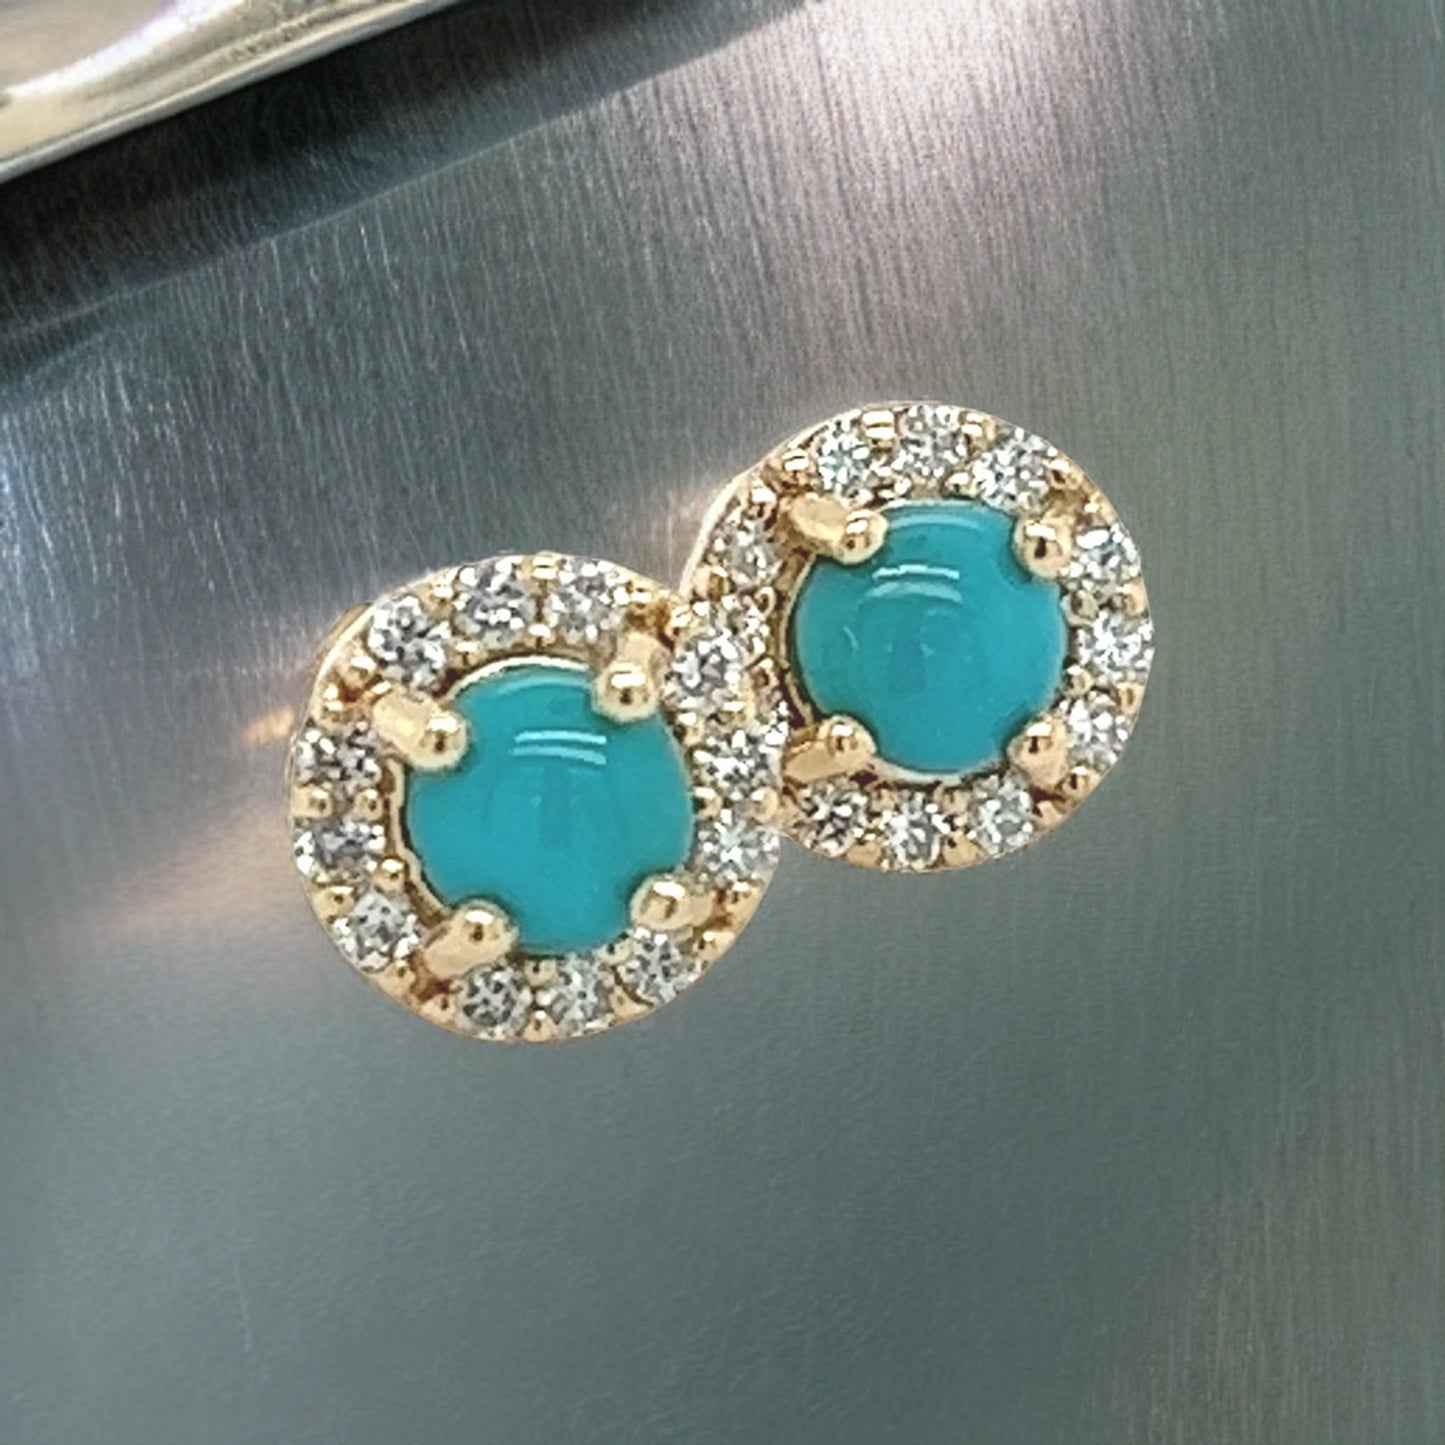 Natural Turquoise Diamond Stud Earrings 14k Yellow Gold 0.65 TCW Certified $1,590 217840